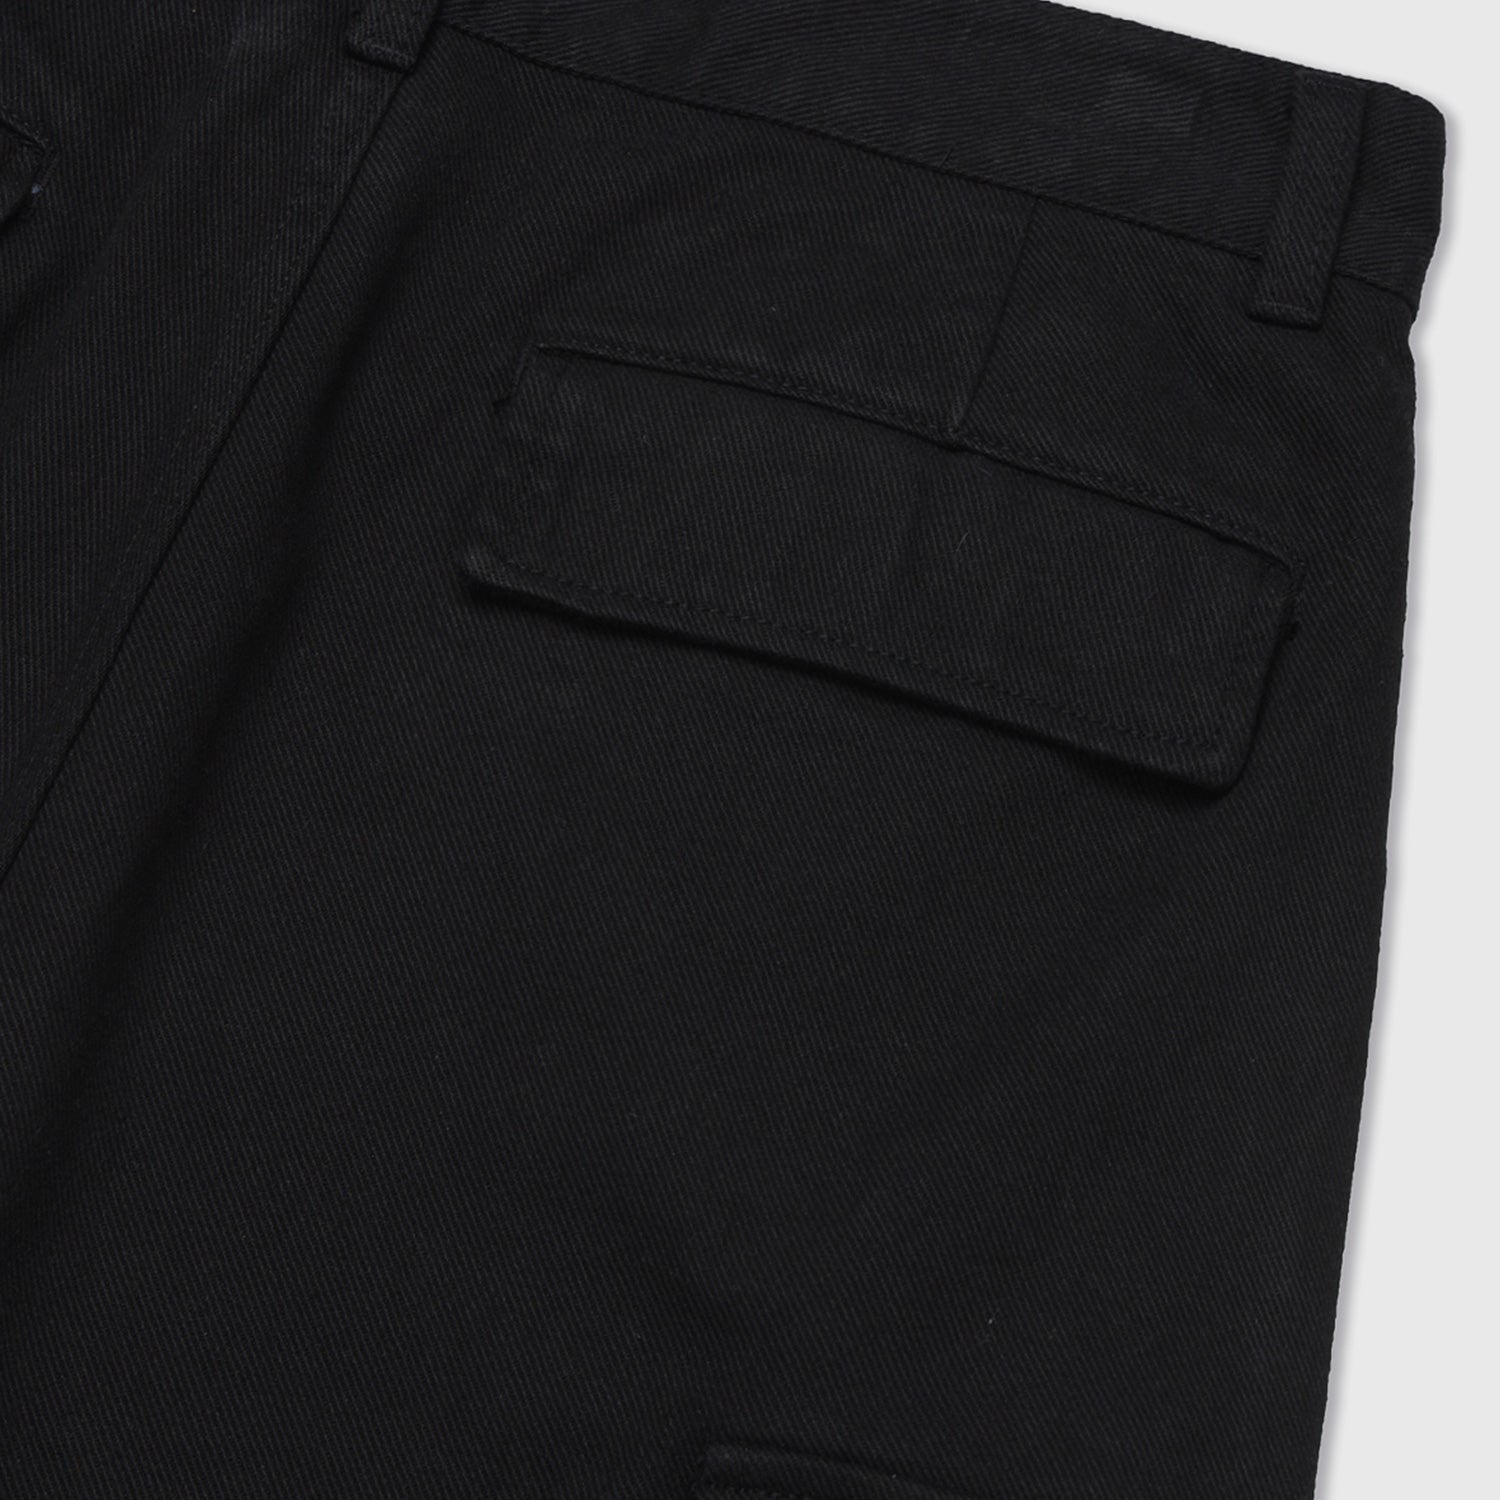 COTTON TWILL MILITARY WIDE CARGO PANTS (BLACK)